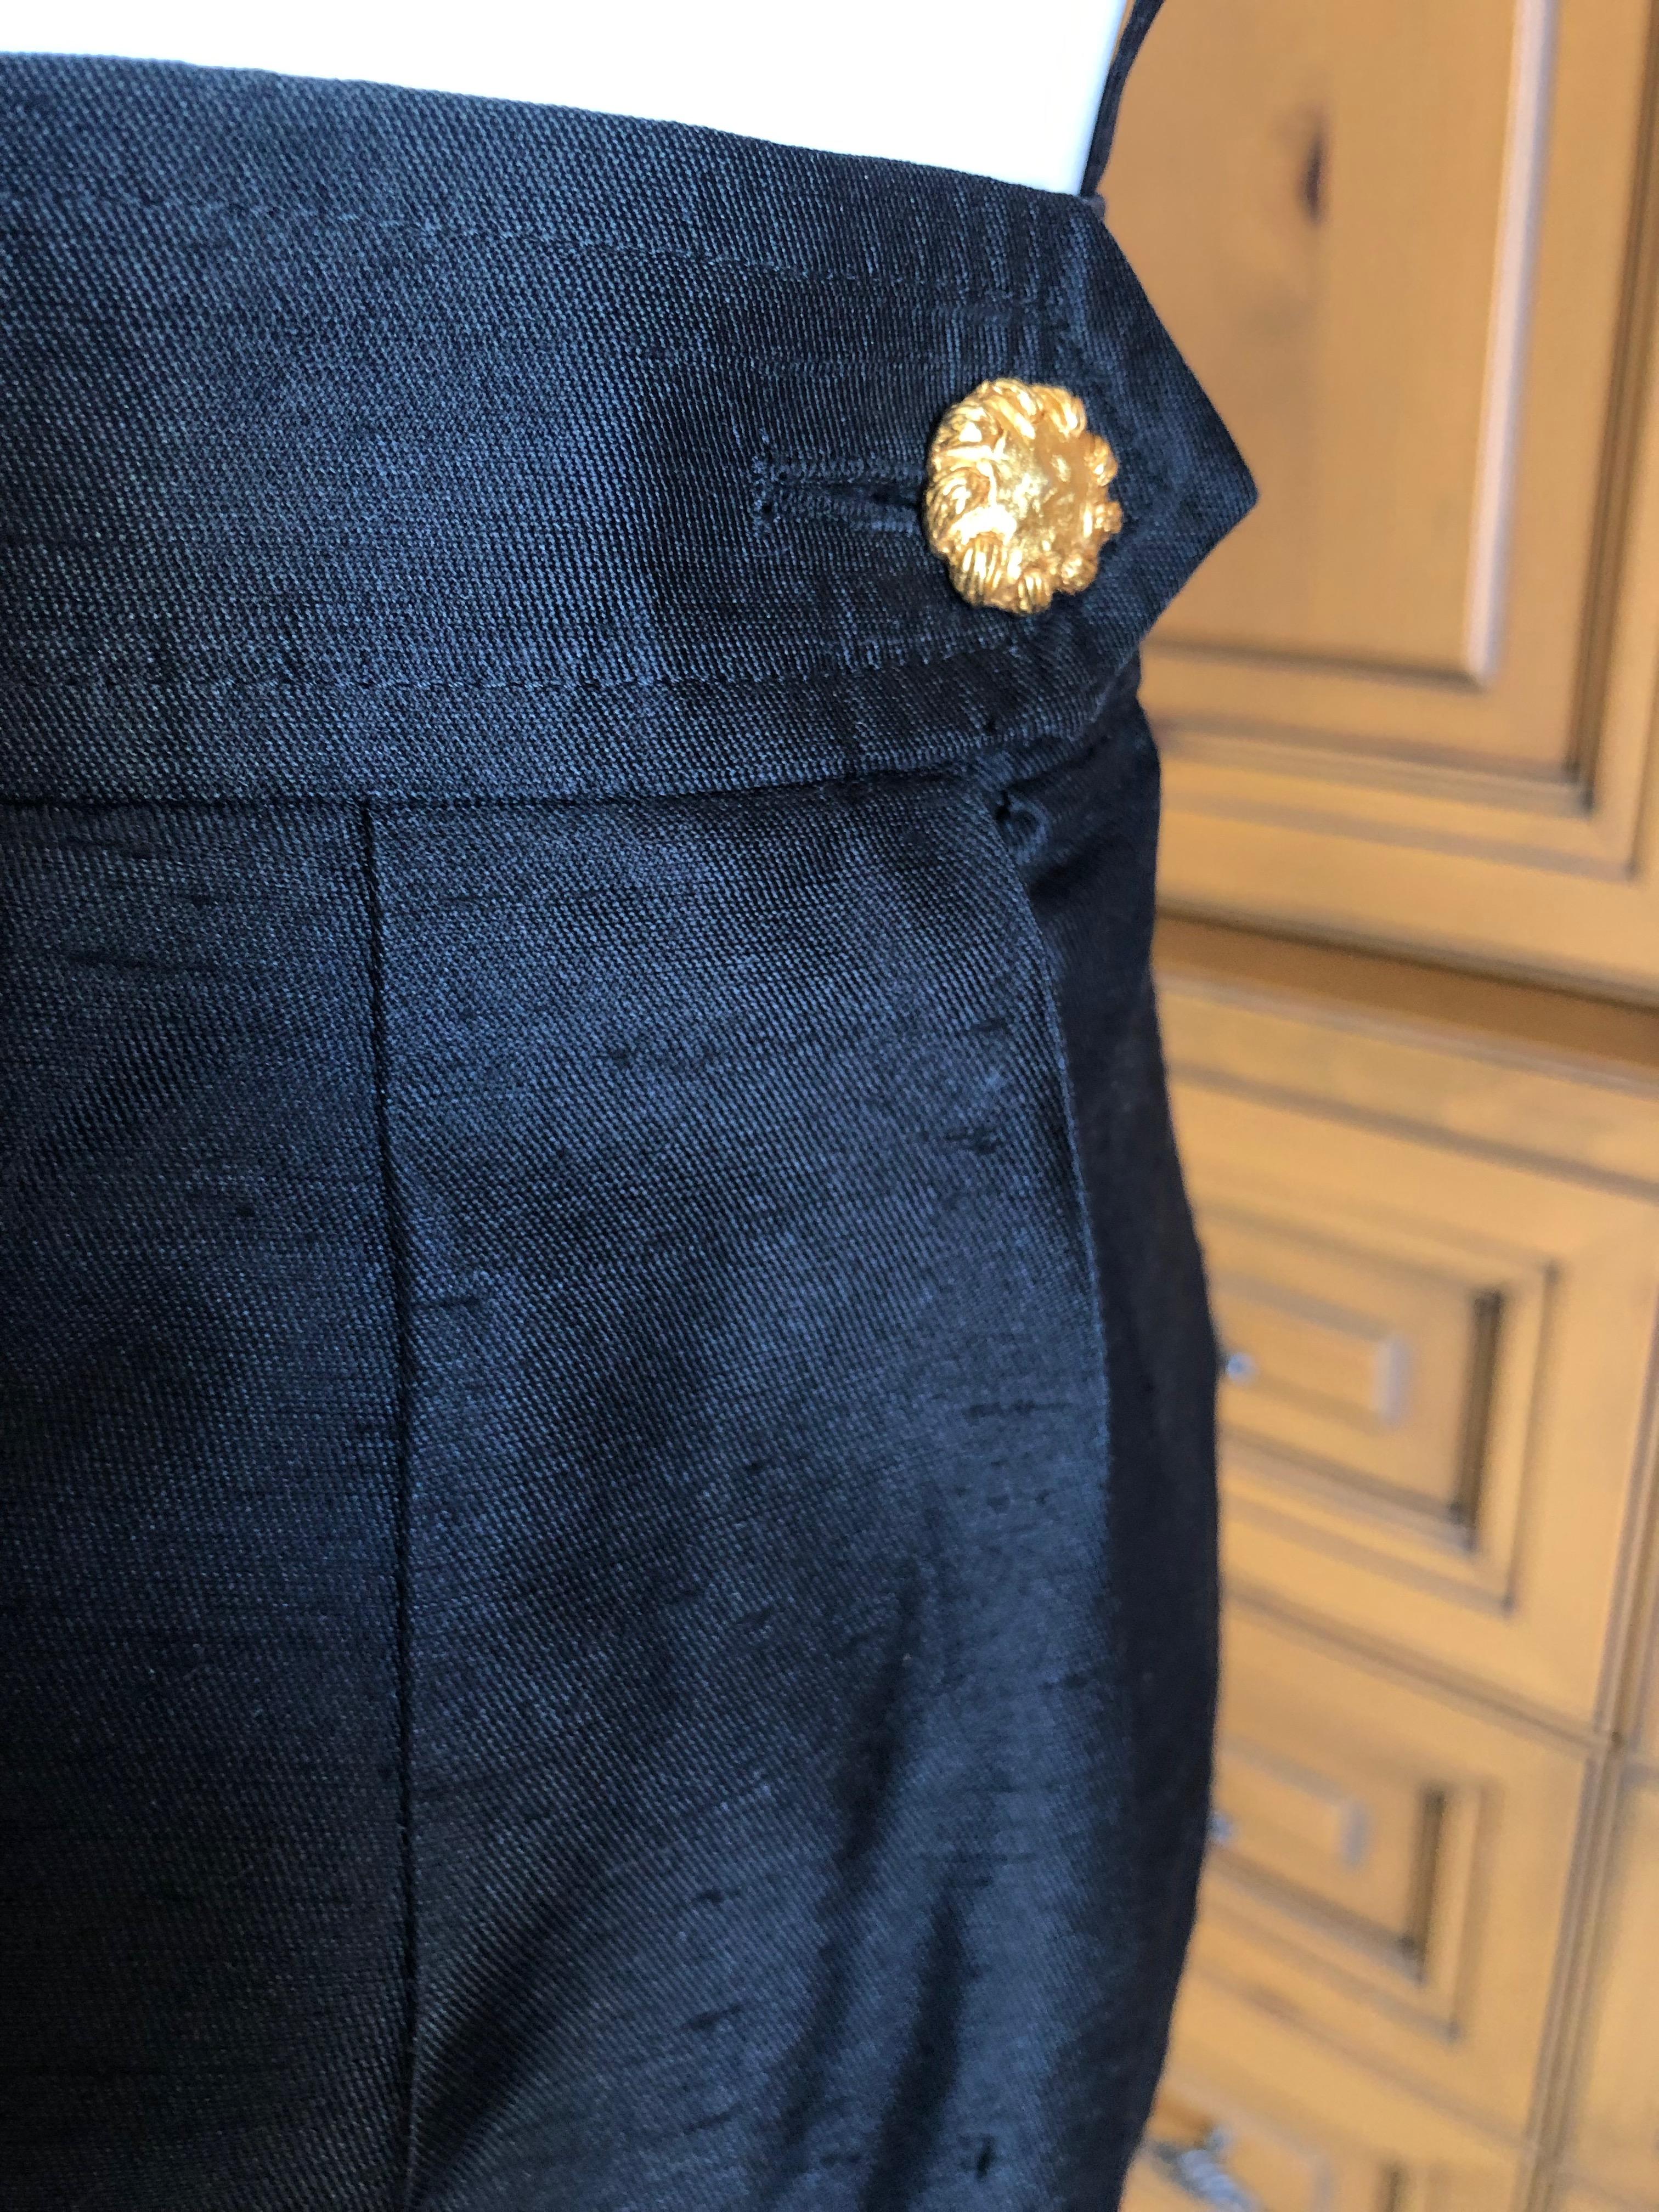 Christian Lacroix Vintage Black Dupioni Silk Suit with Bold Gold Faucet Buttons In Excellent Condition For Sale In Cloverdale, CA